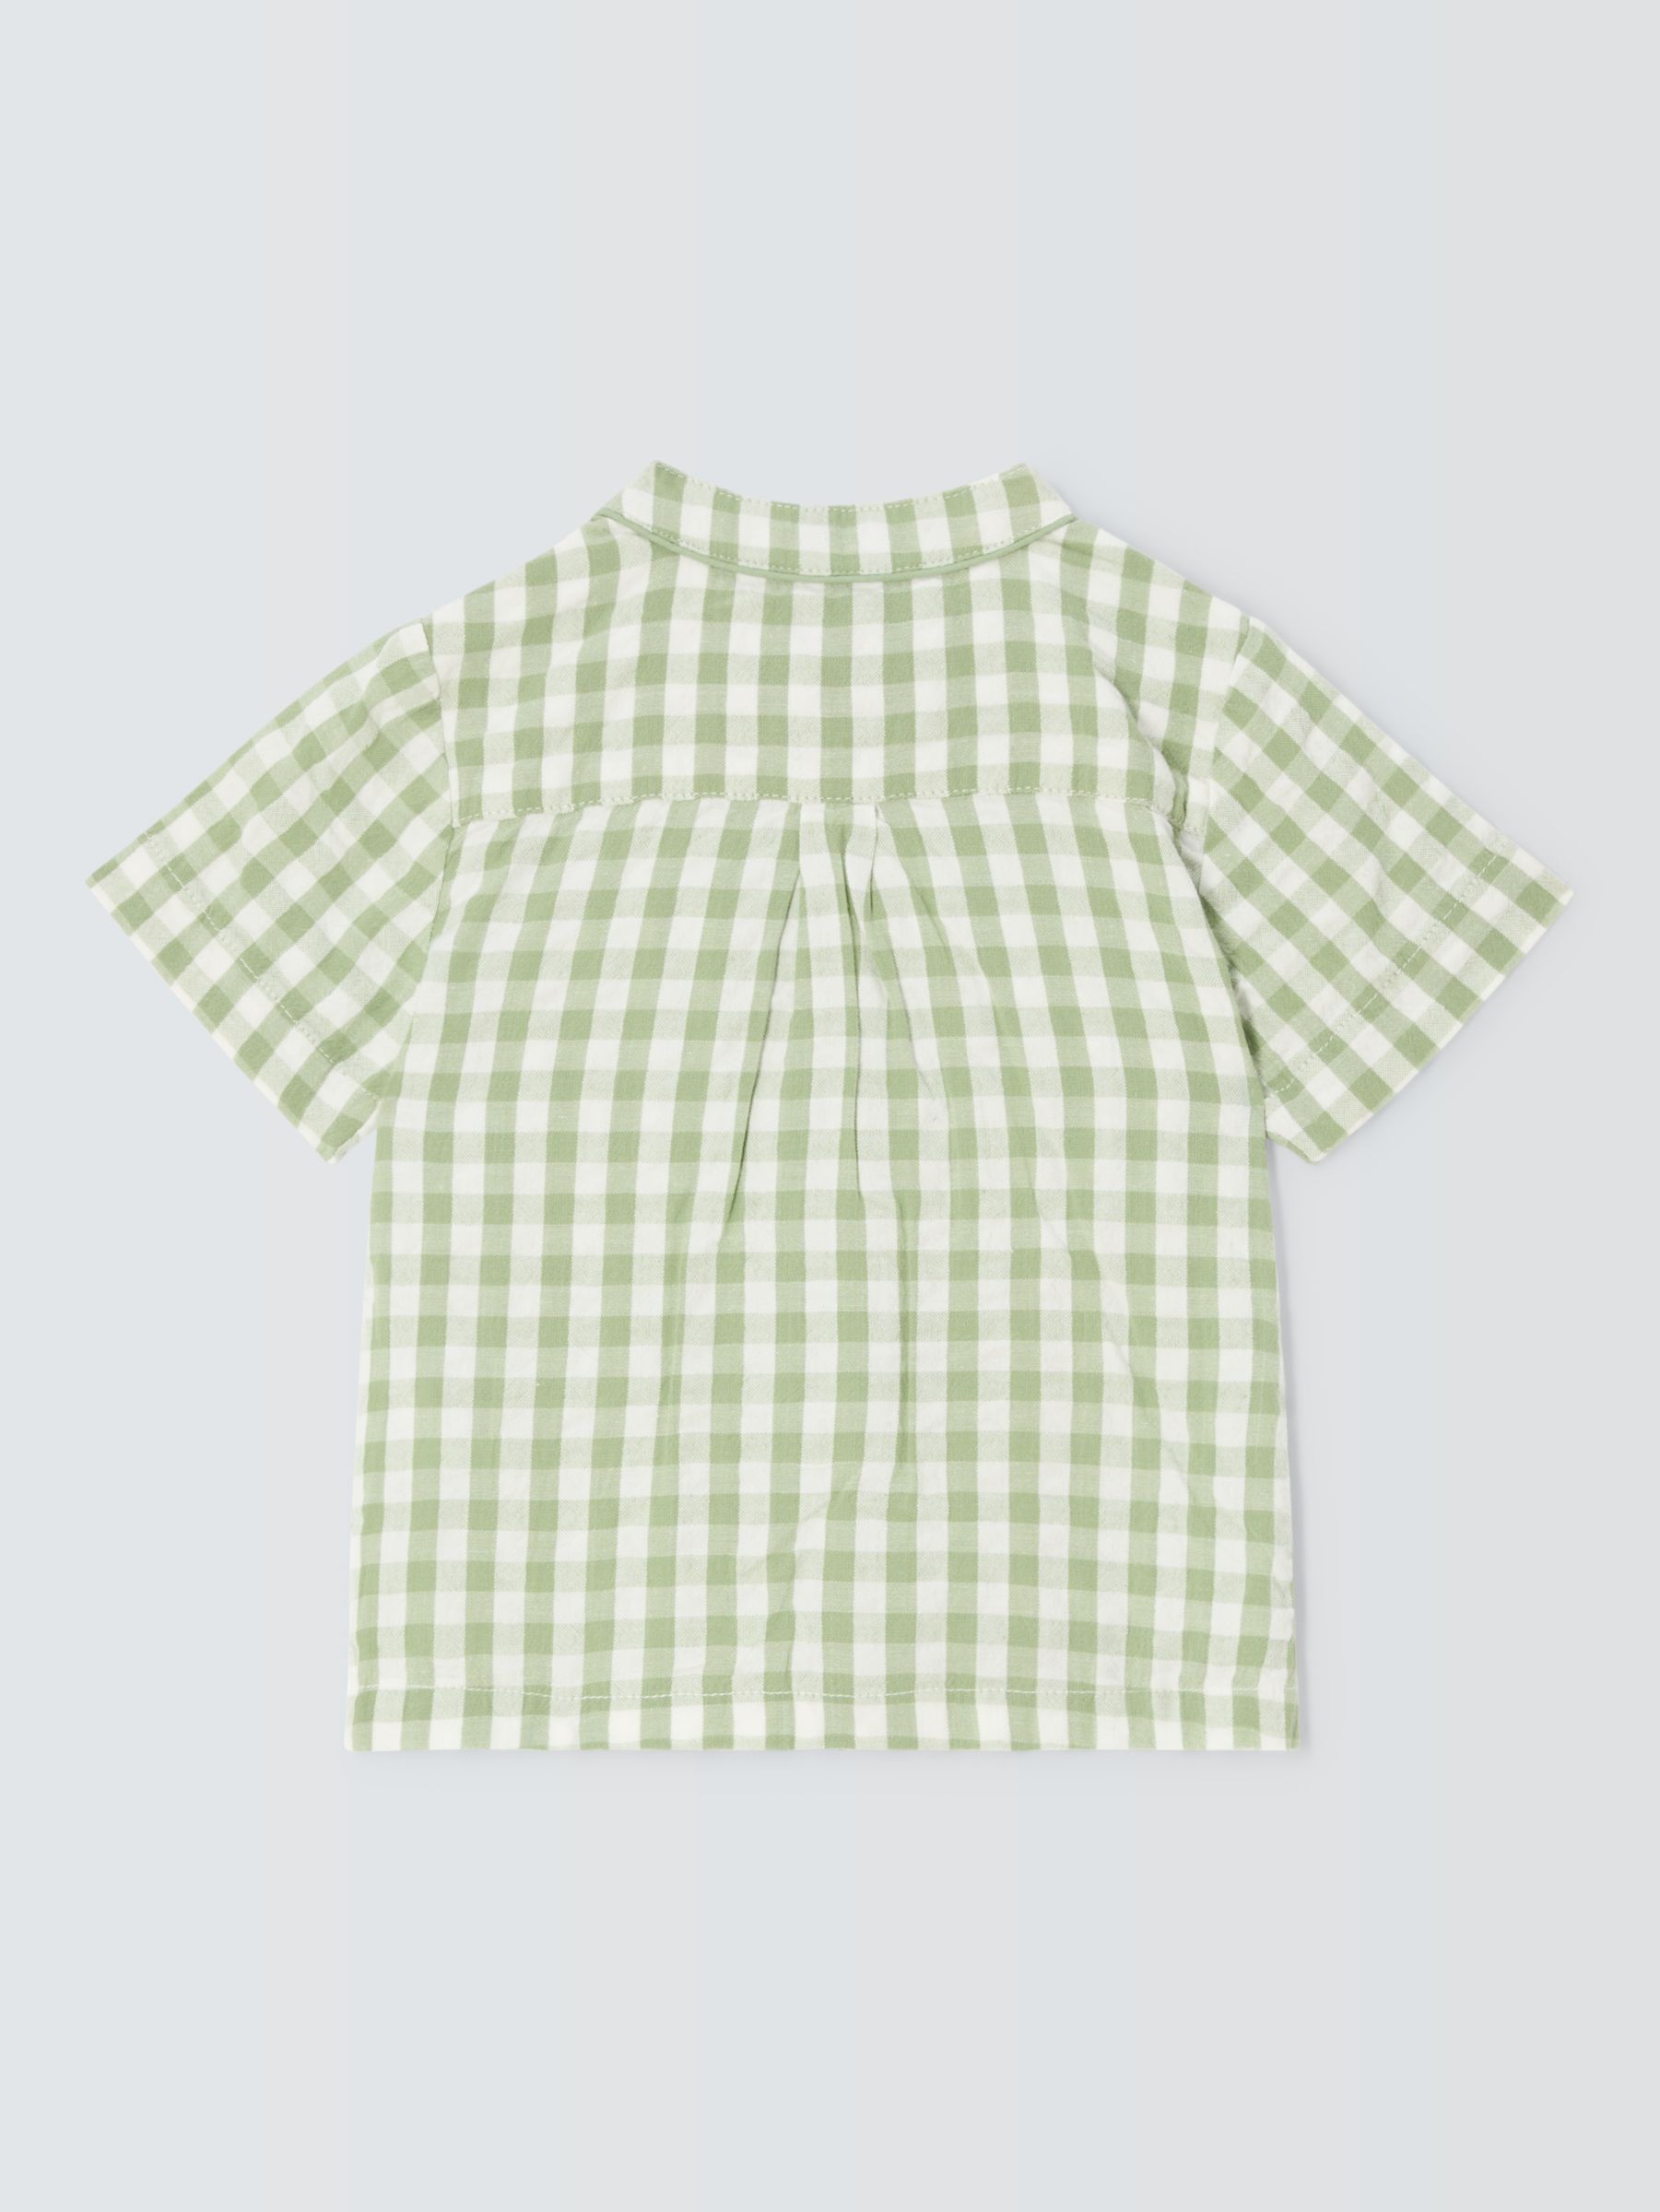 John Lewis Heirloom Collection Baby Cotton Gingham Shirt, Green, 0-3 months